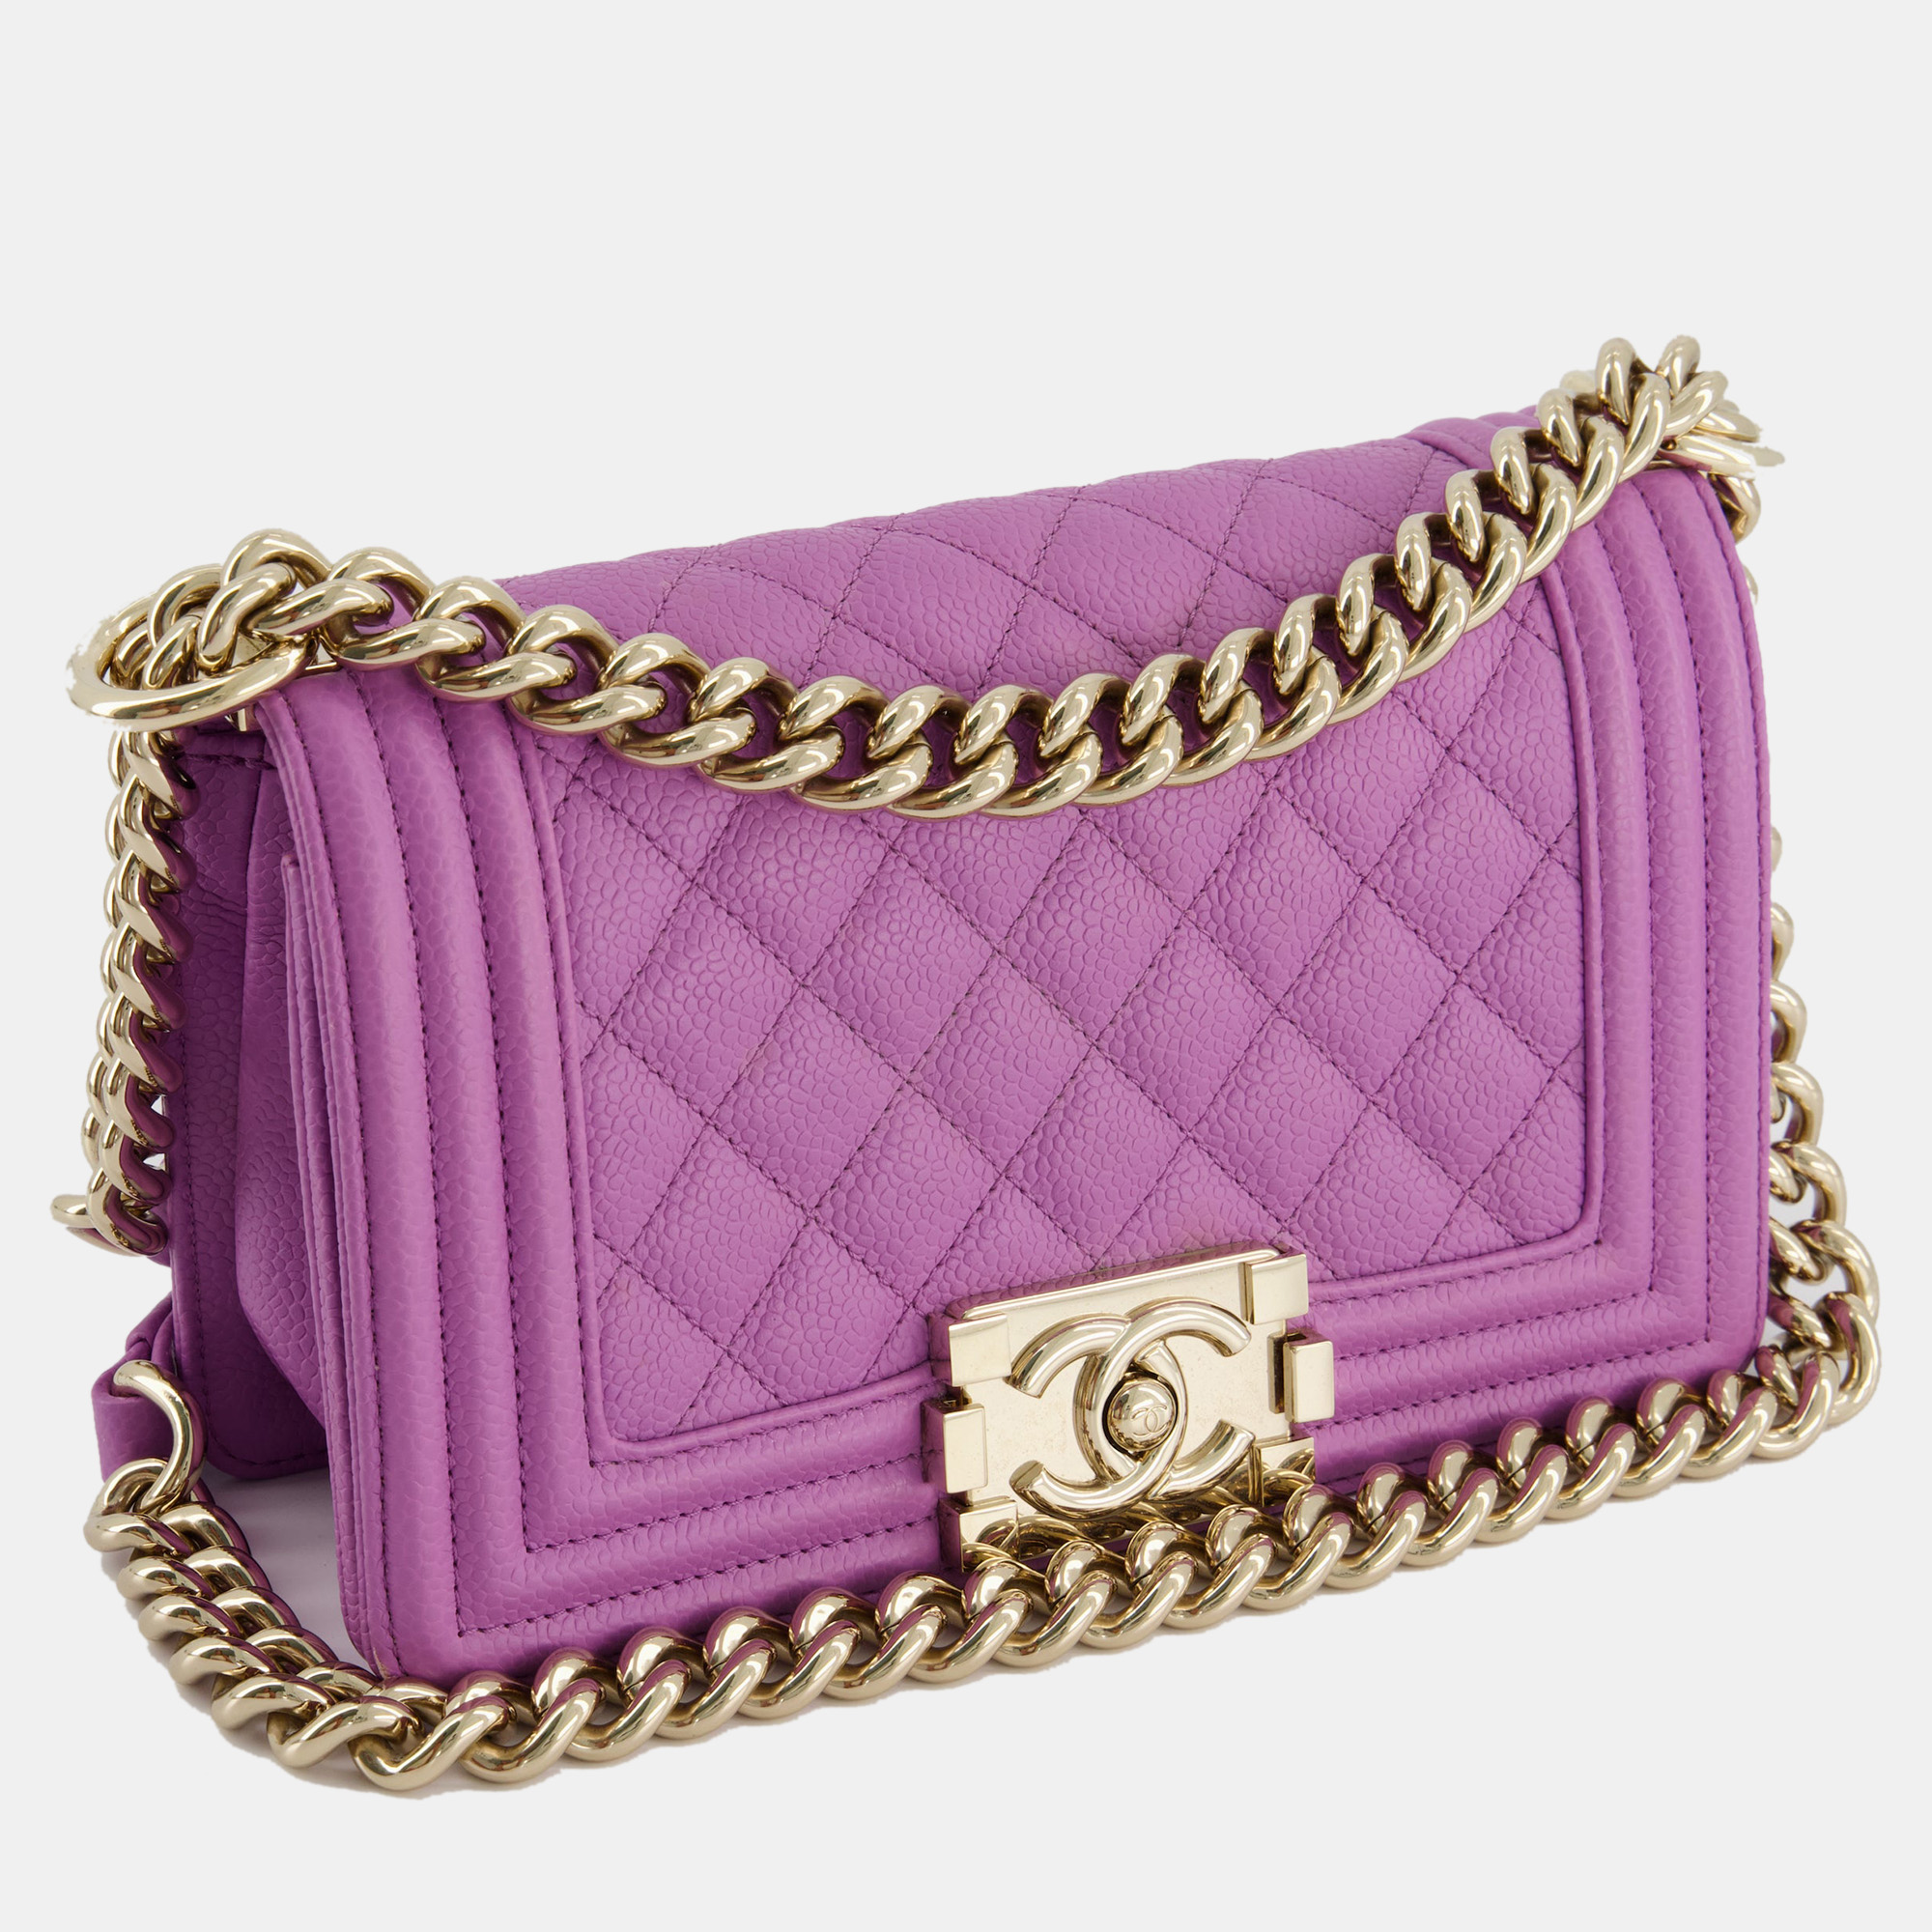 Chanel Purple Small Boy Bag In Lambskin Leather With Champagne Gold Hardware